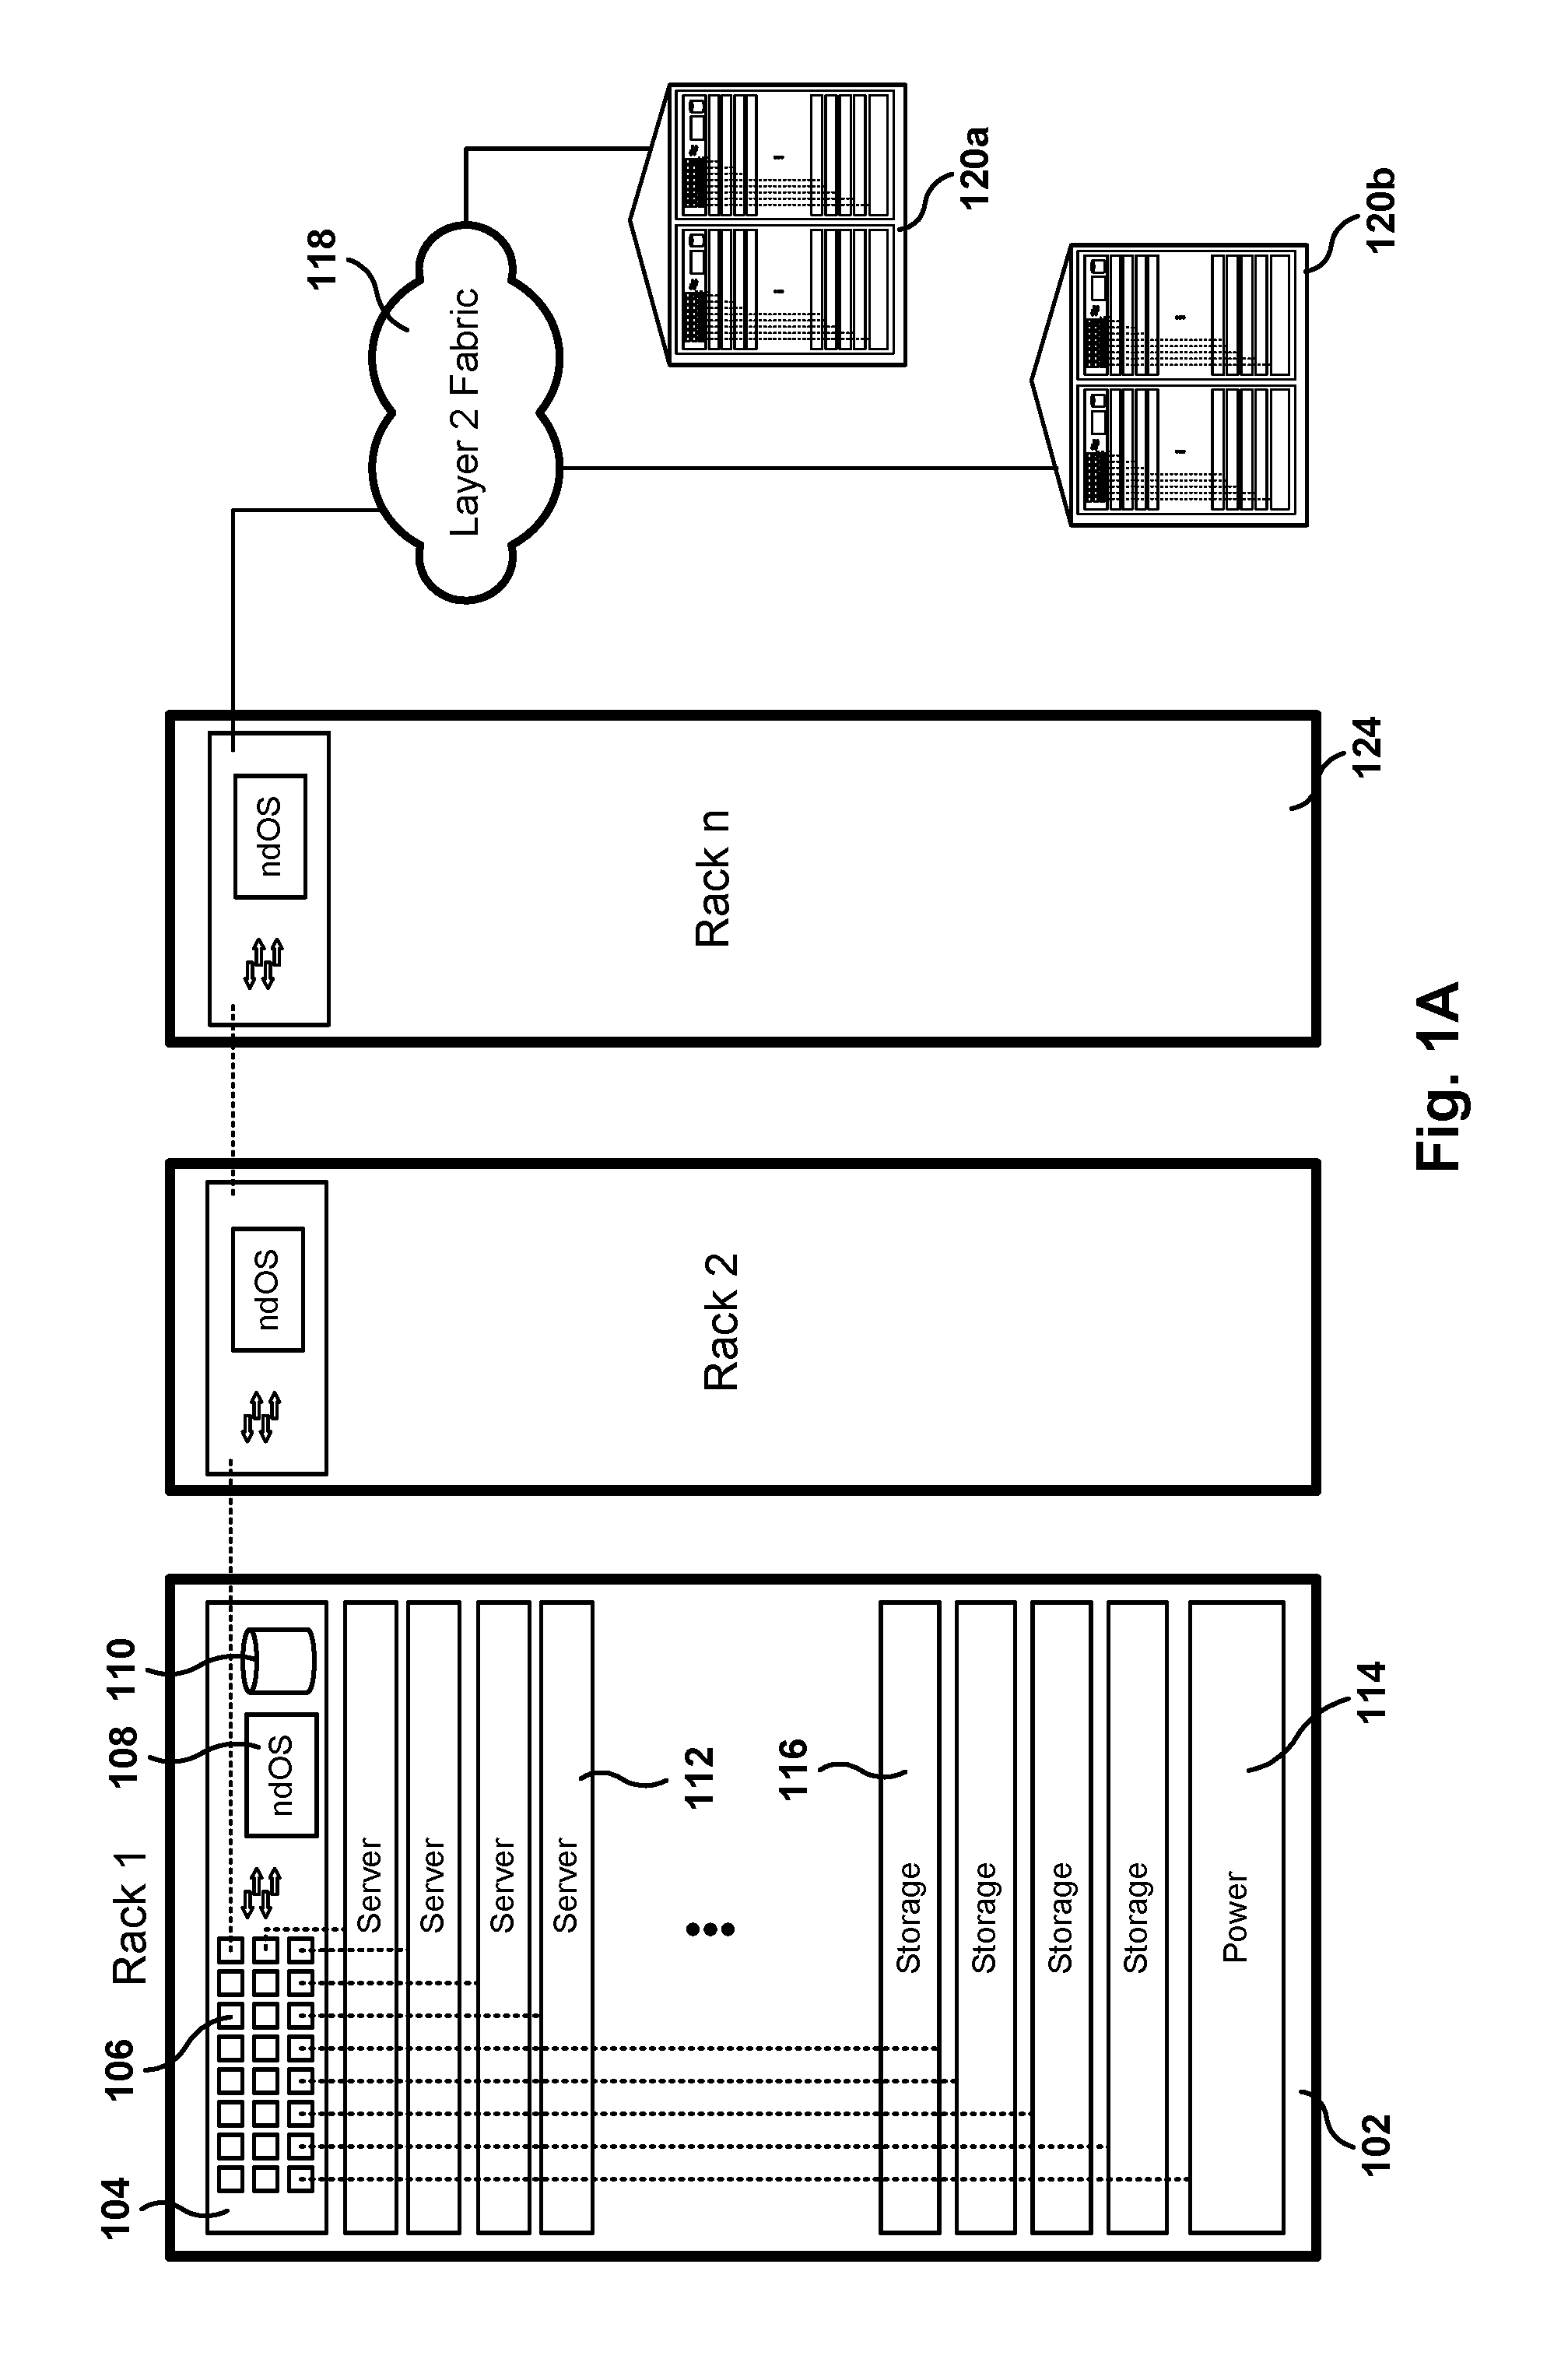 Integrated server with switching capabilities and network operating system